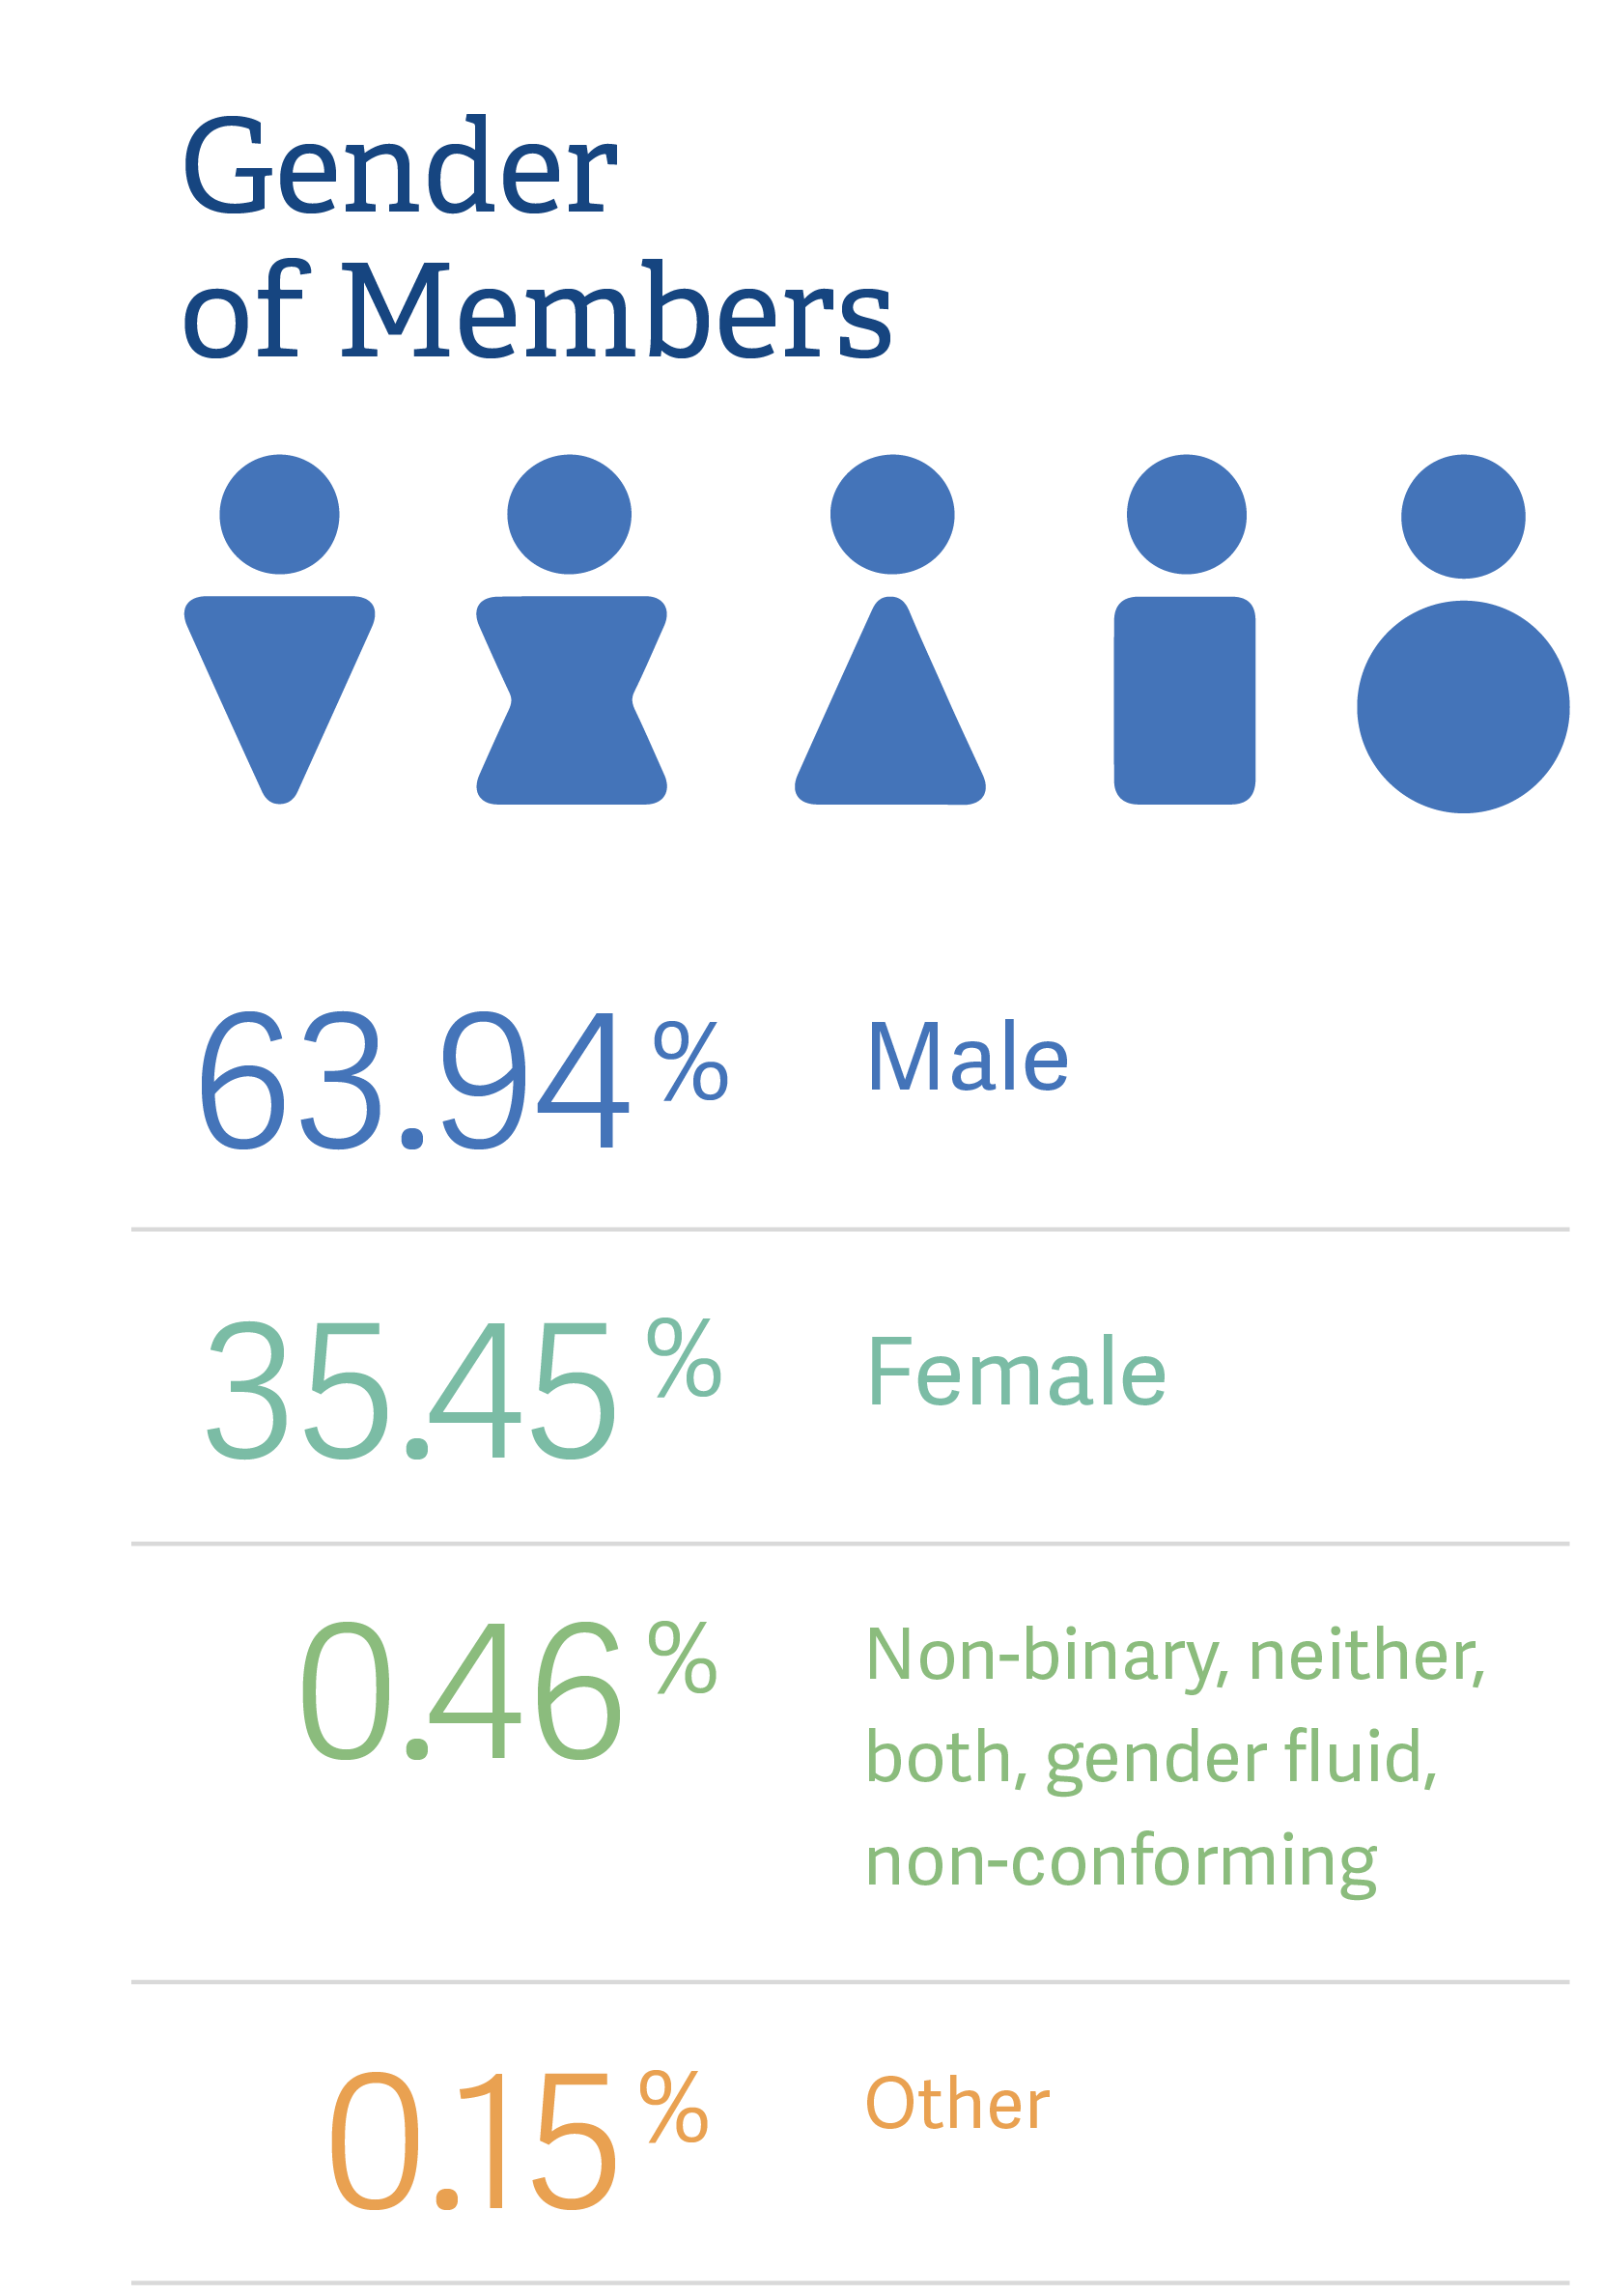 gender of members English infographic